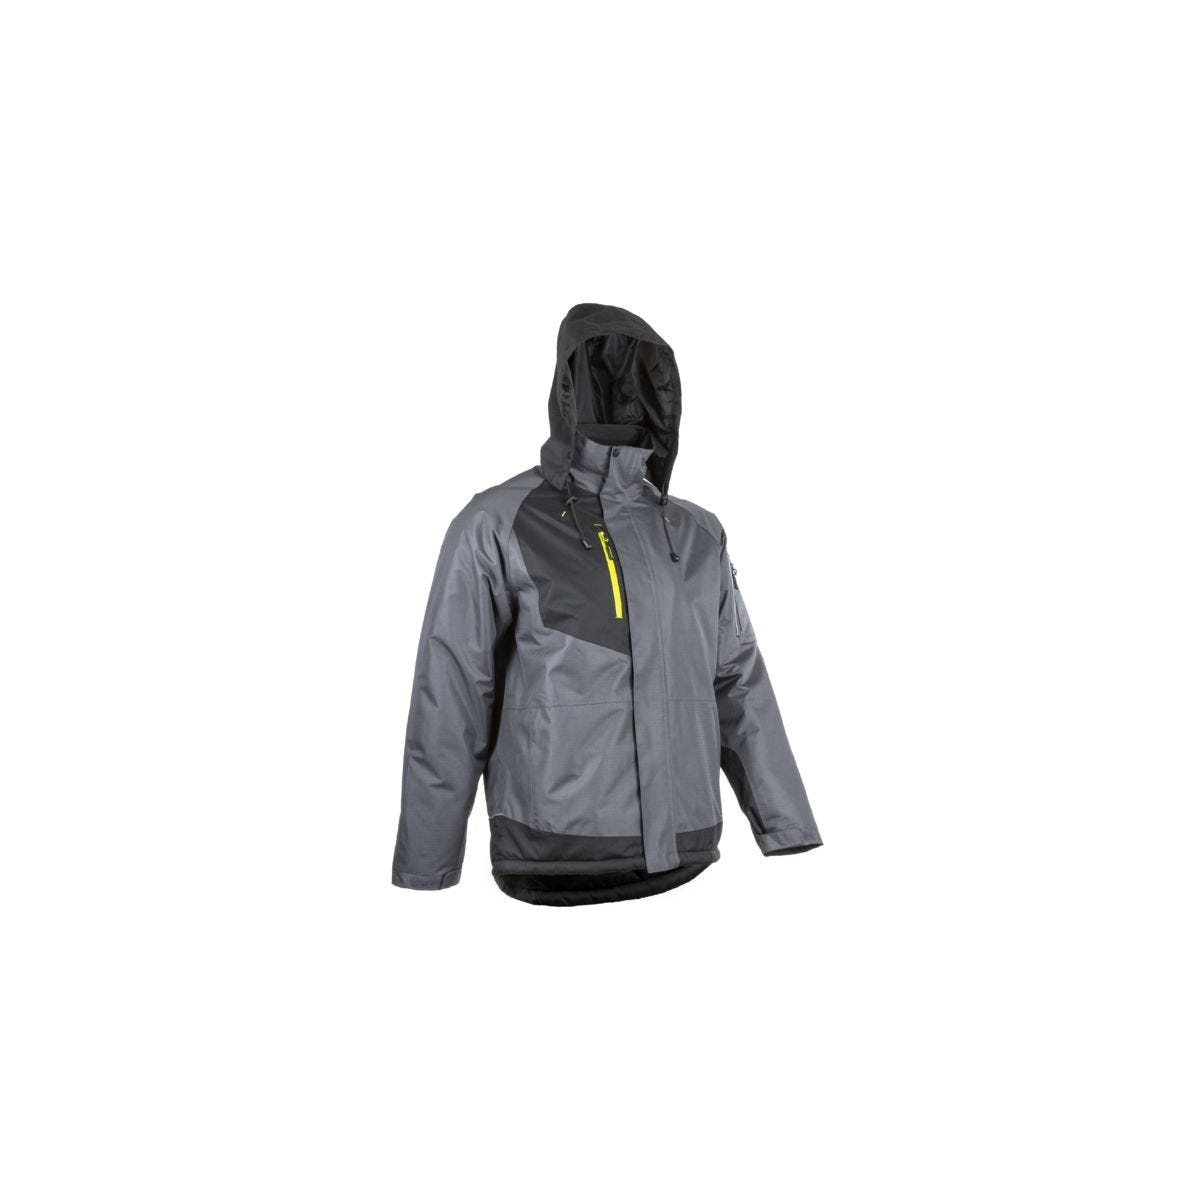 YUZU Parka anthracite/noir, Polyester Ripstop + Polaire 300g/m² - COVERGUARD - Taille XL 2